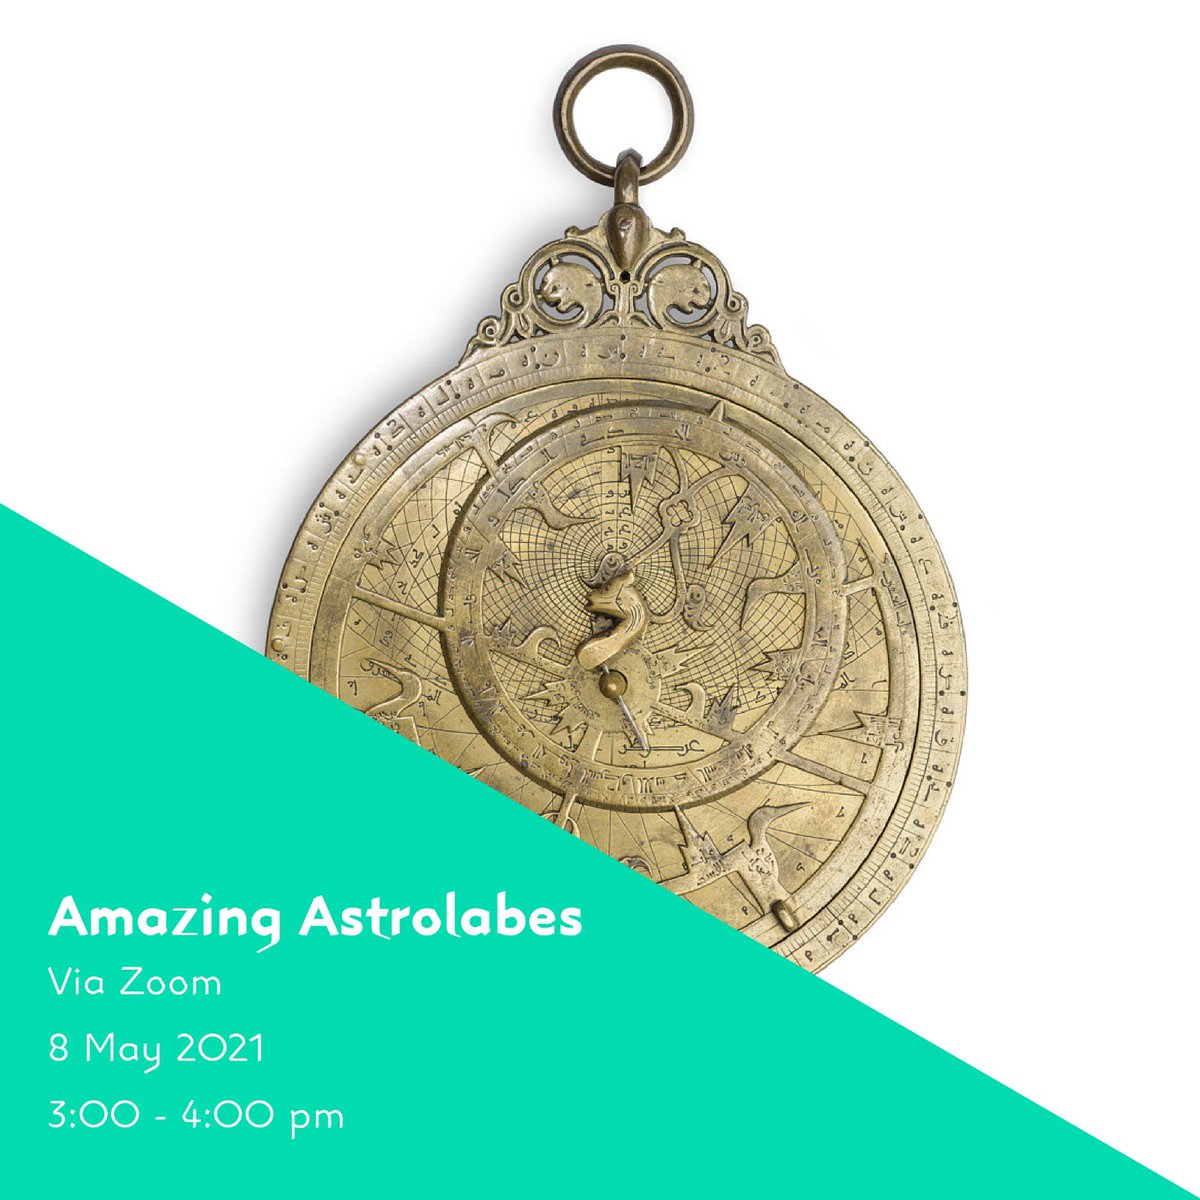 Join us on Saturday at 3:00pm for an astronomy-inspired online session about the Astrolabes in celebration of Doha Capital of Culture in the Islamic World. This session will be held in English for 8 – 11 year olds Zoom Meeting us02web.zoom.us/j/8037657556